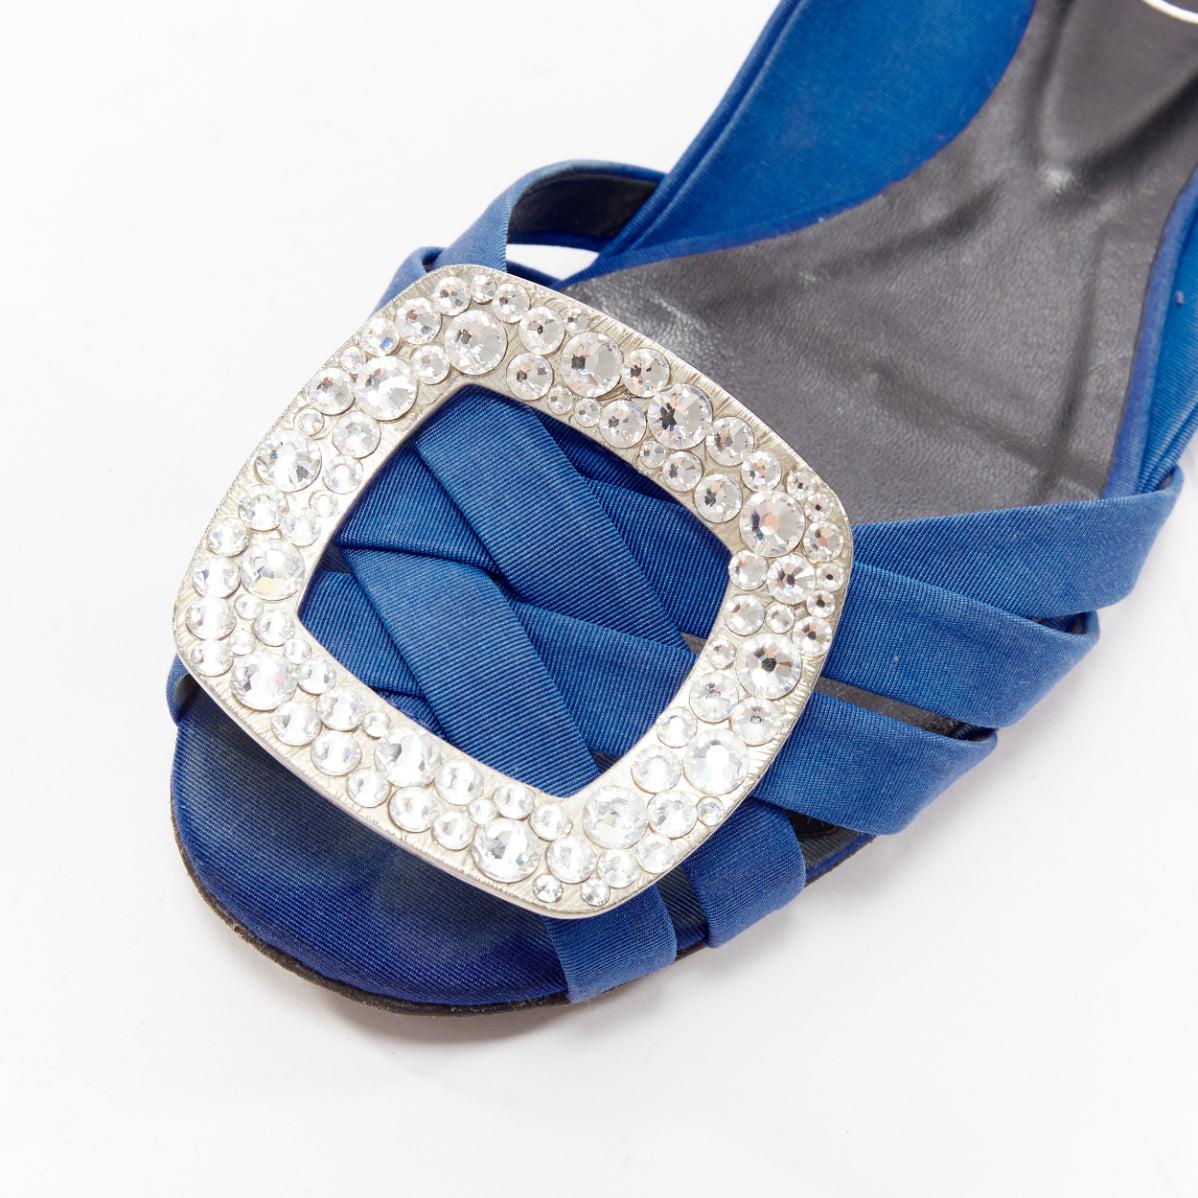 ROGER VIVIER blue satin crystal square buckles woven front pep toe flats EU34.5 For Sale 2